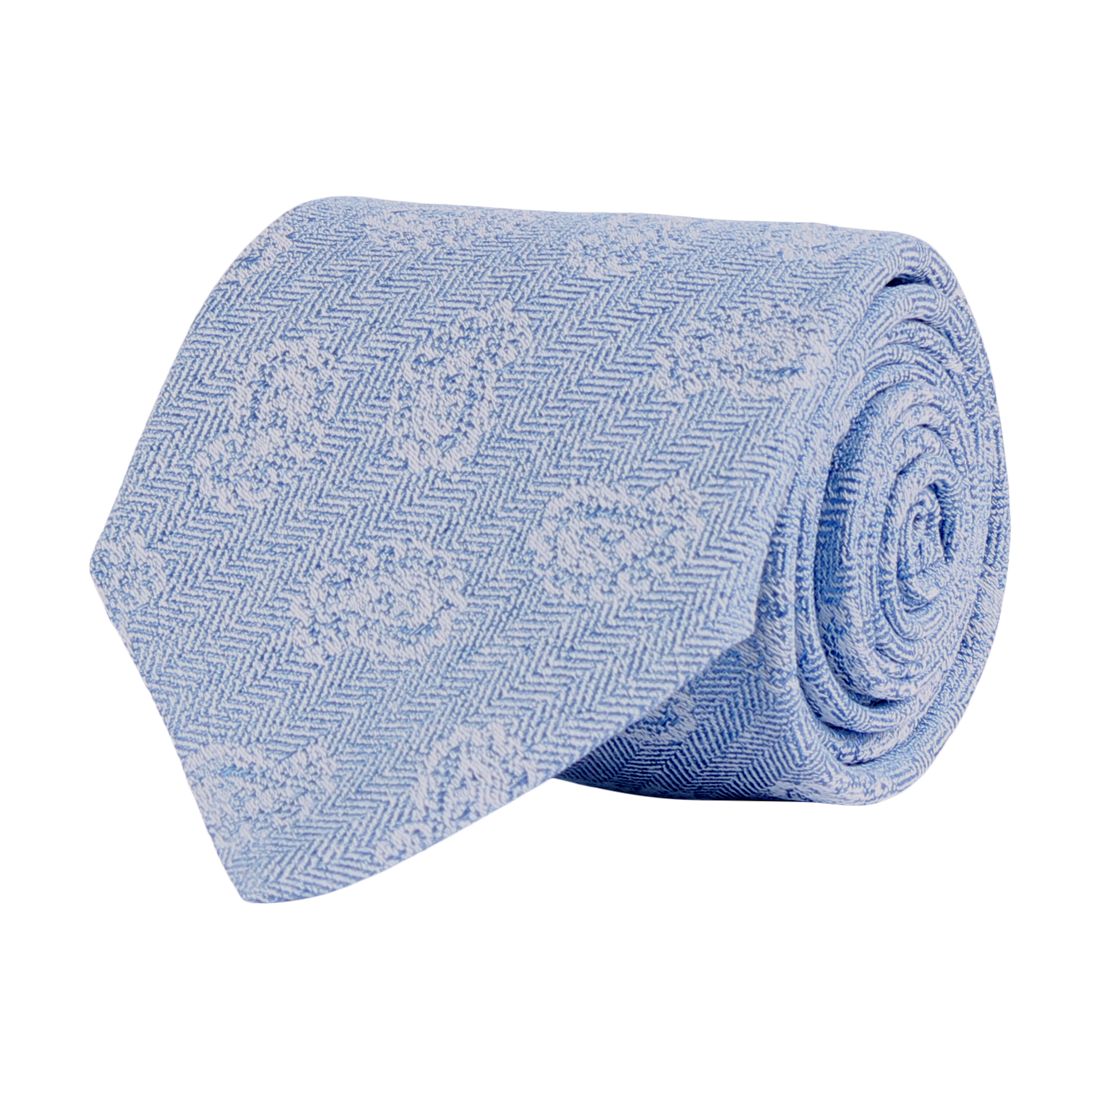 Classic Jacquard Silk and Cotton Necktie in Blue by House of Amanda Christensen